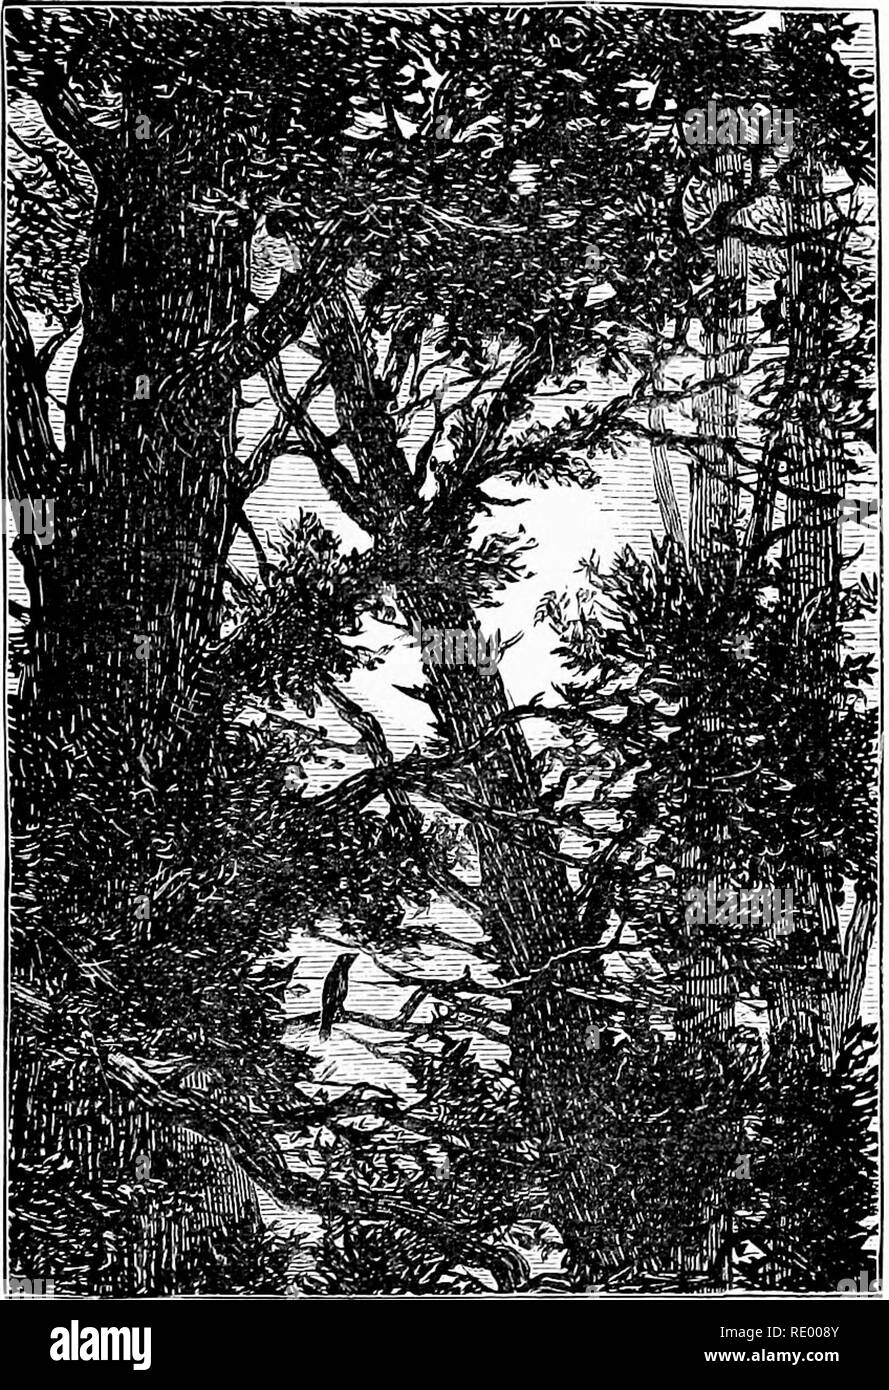 . Hours in my garden, and other nature-sketches. With 138 illus. Natural history. Nightingale s Notes. 143 The pauses grew shorter and shorter as we sat and listened. At first, despite the notion of a challenge, there was more of a complaining plaintive air, varied only now and then with trills, gurgles, penetrating rolls,. and half-whistles (we cannot describe that indescrib- able music, though its subtlely pertinacious, penetrat- ing sweetness is found in no whistle). .Gradually the tones grew deeper, fuller, richer, as though the mere. Please note that these images are extracted from scanne Stock Photo